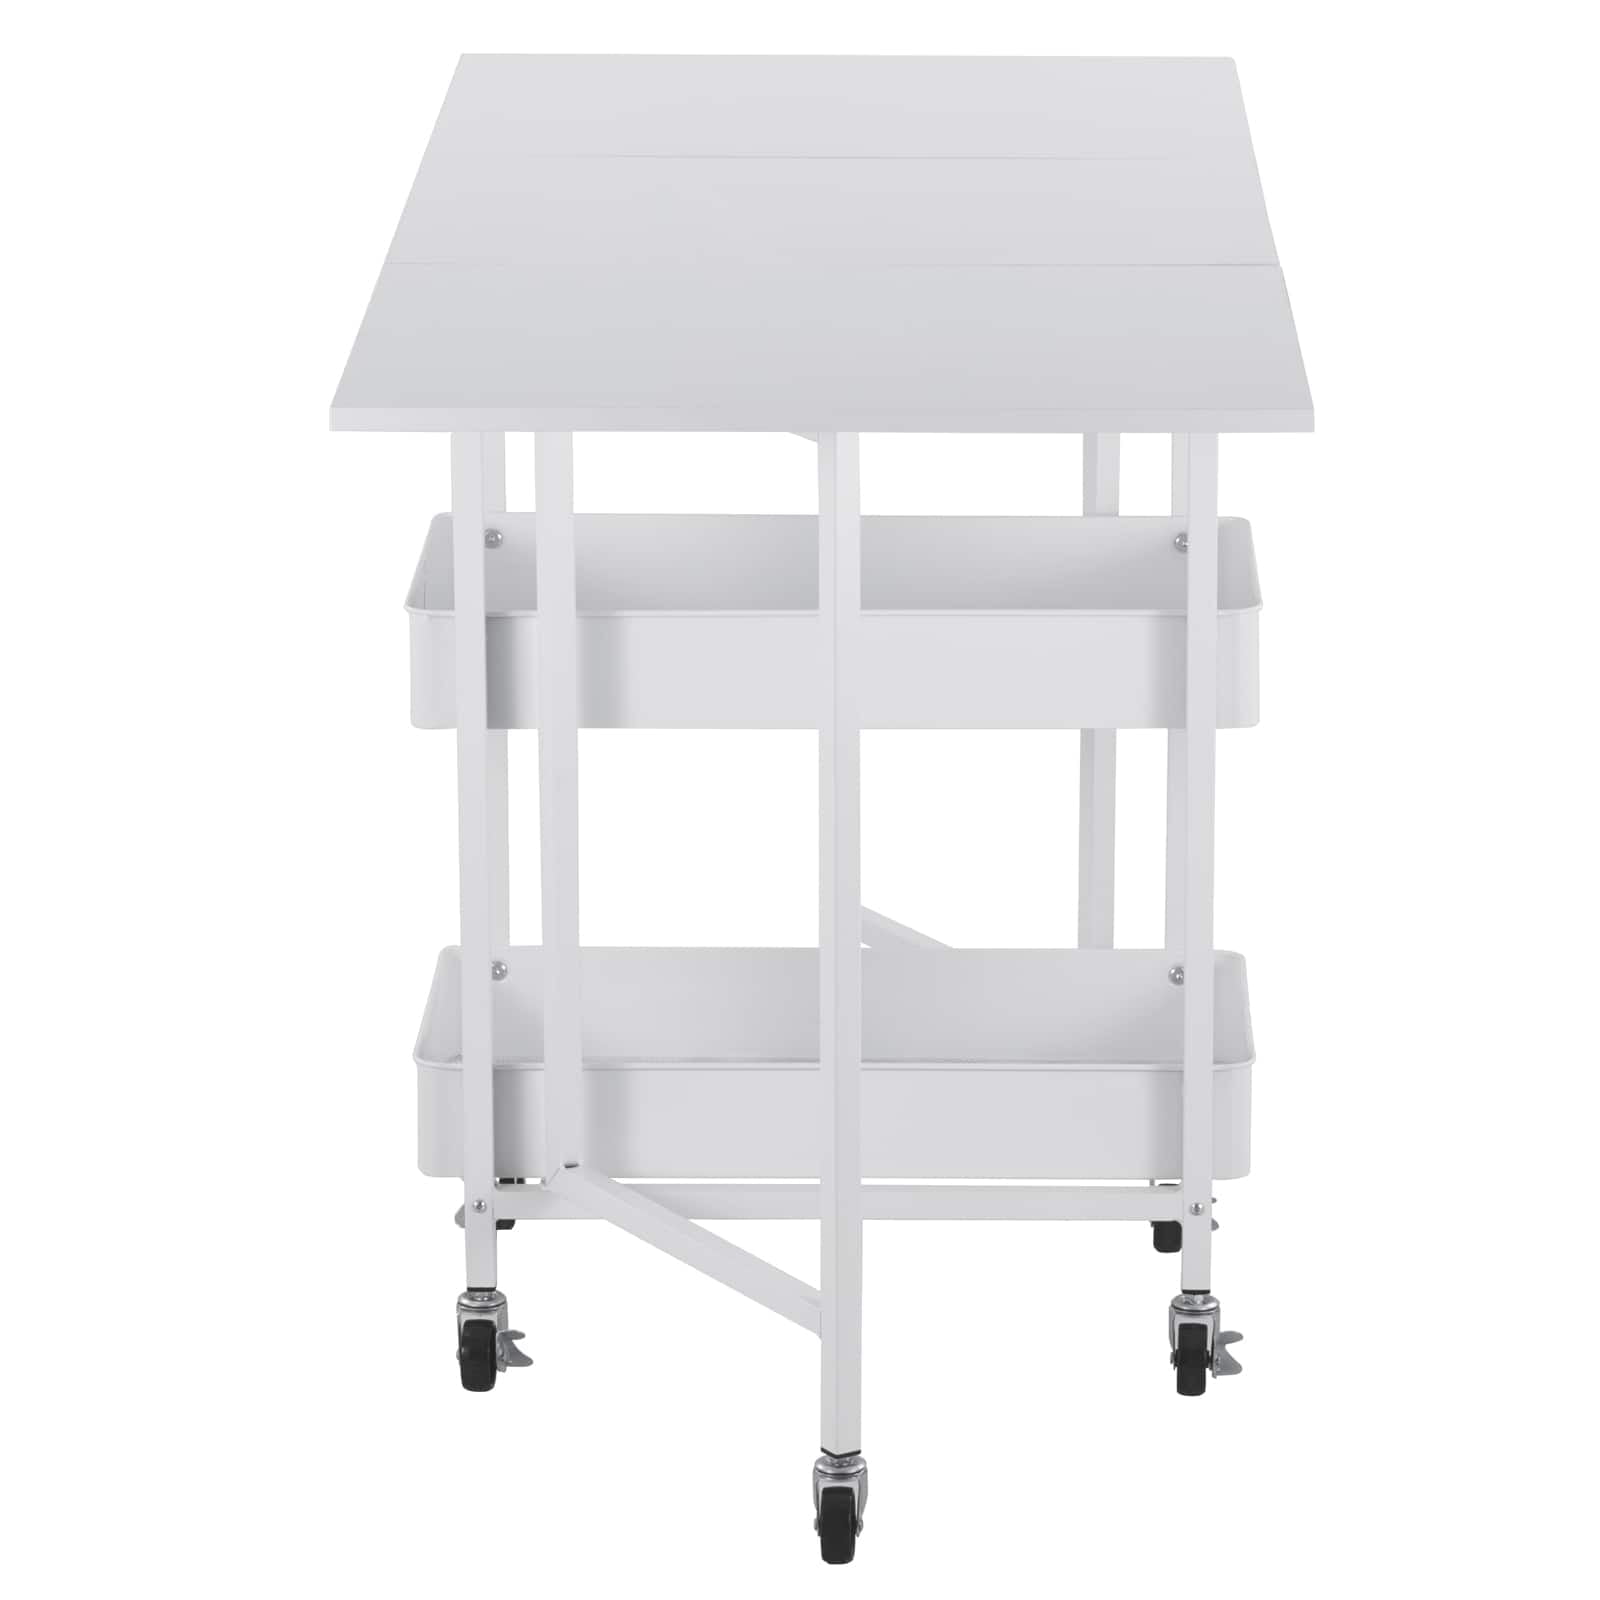 MICHAELS Kensington Table Rolling Cart by Simply Tidy™ - 2